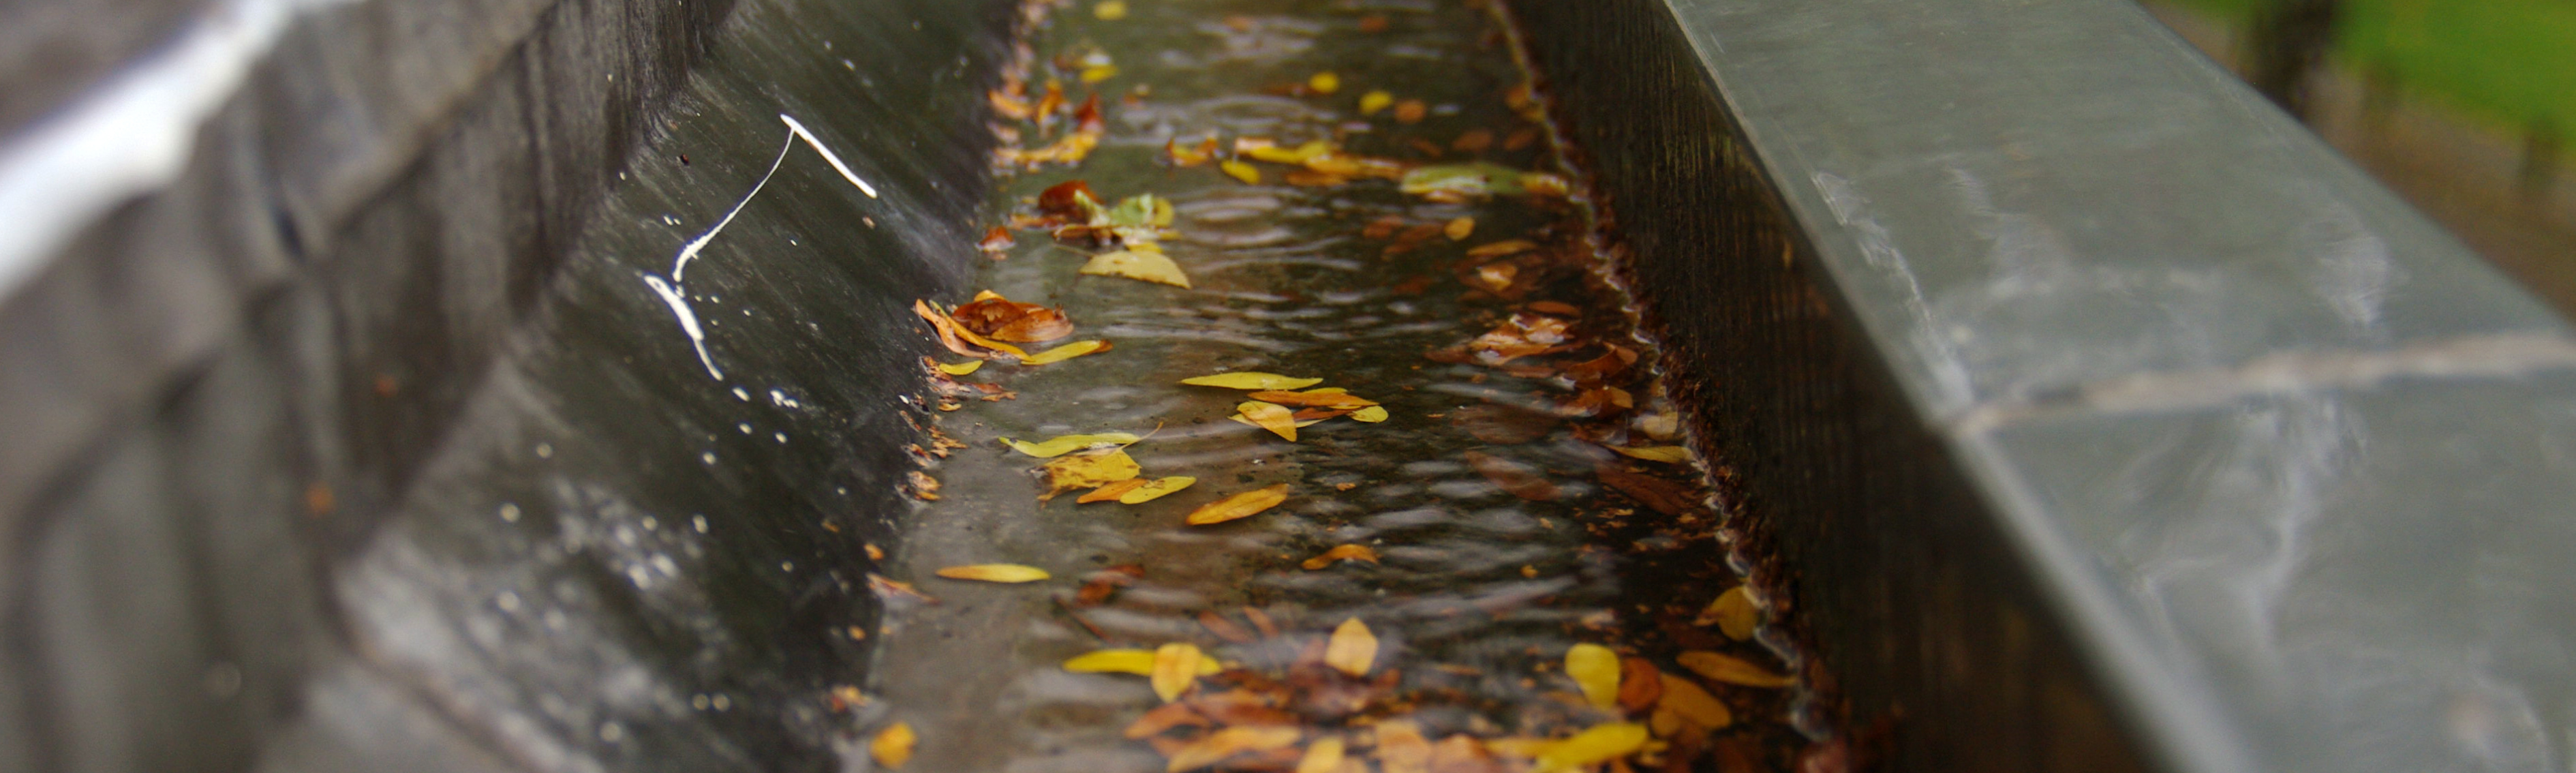 KWR Roofing - Blog - Maintaining your gutters and downpipes